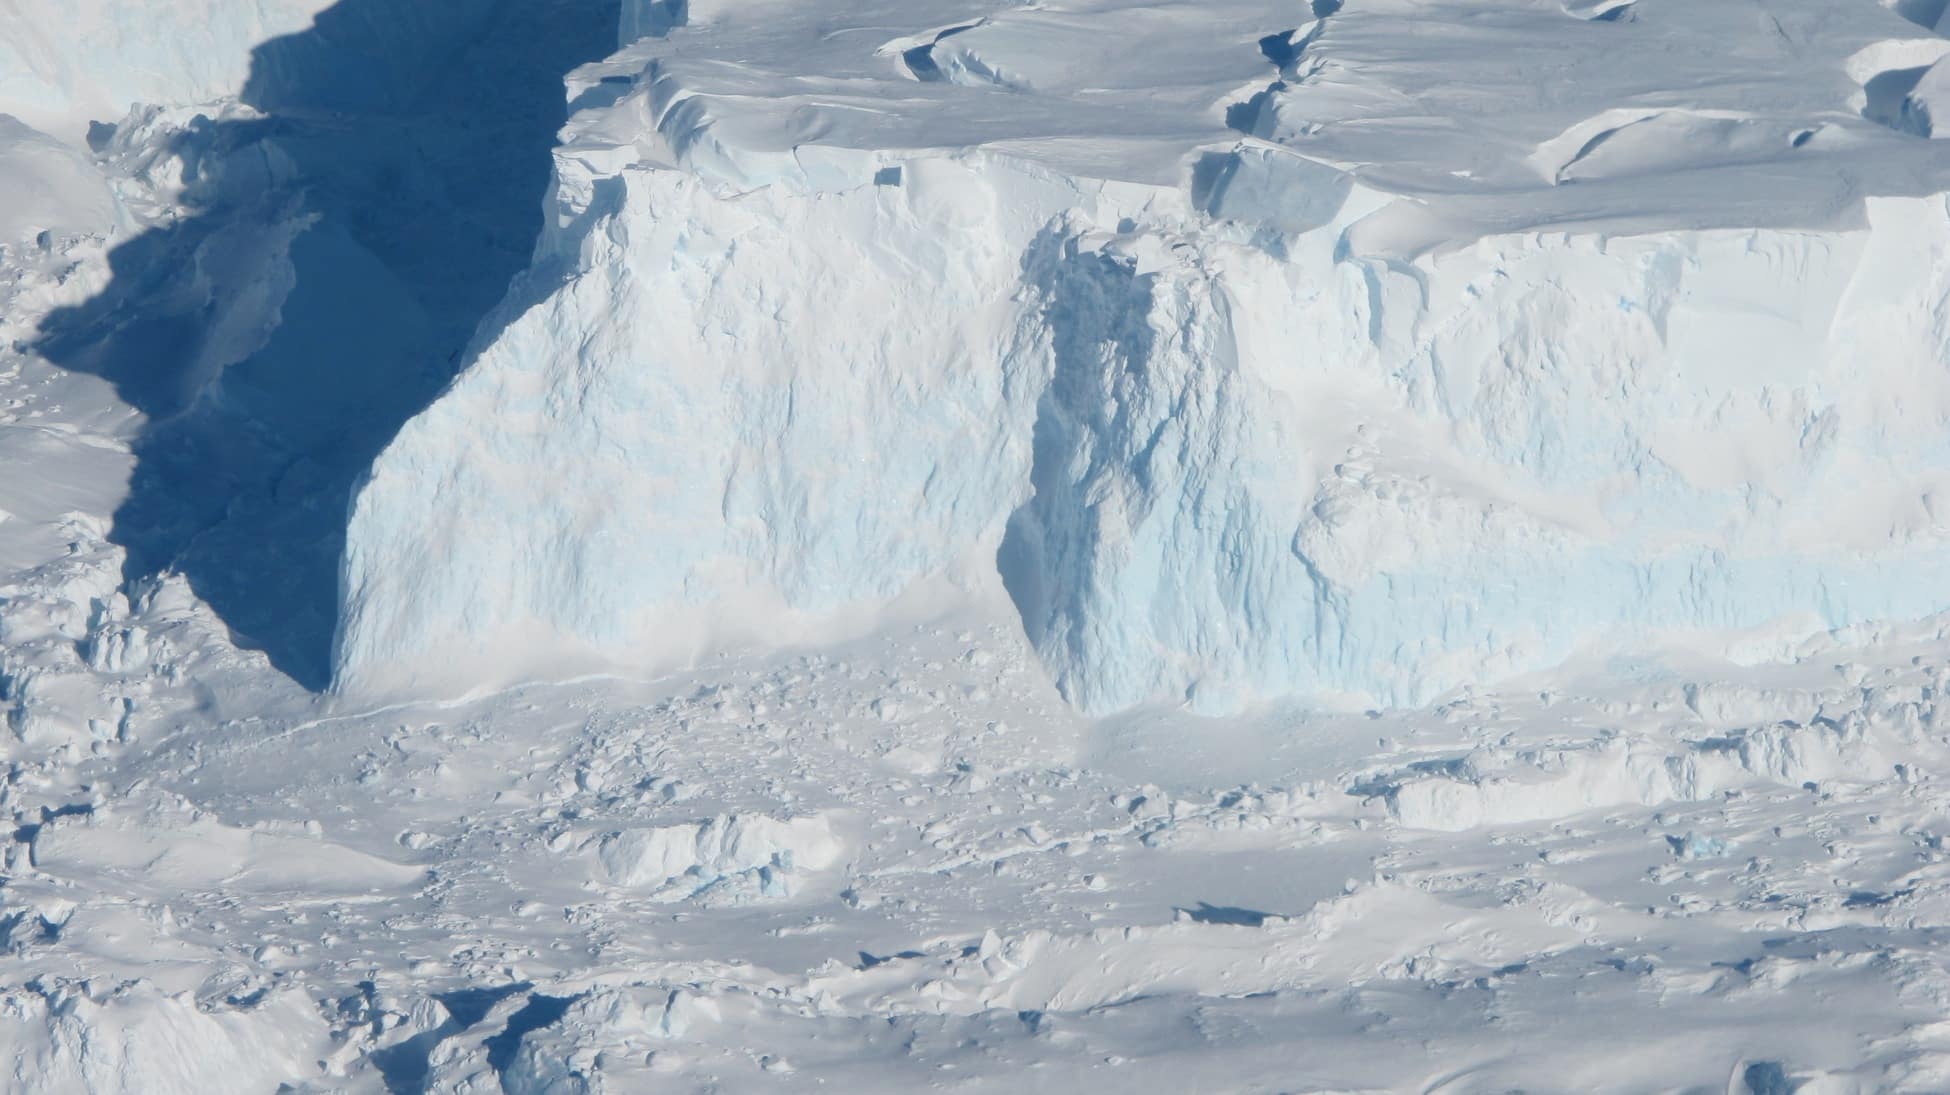 A study has found that the “glacier of the end of the world” is melting at record speed